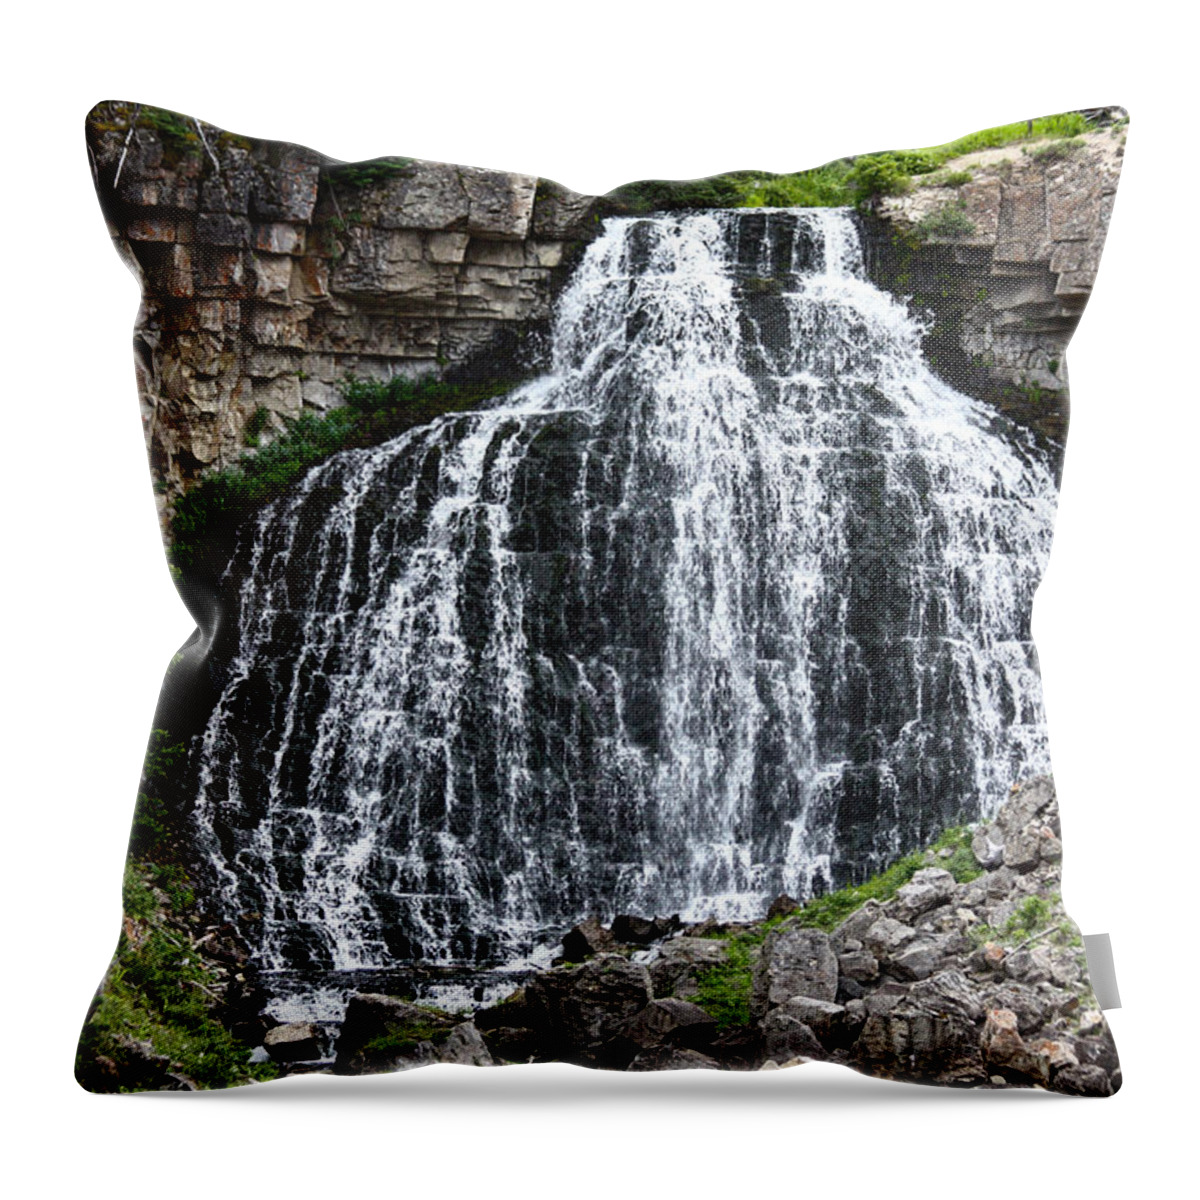 Rustic Falls Throw Pillow featuring the photograph Rustic Falls by Shane Bechler